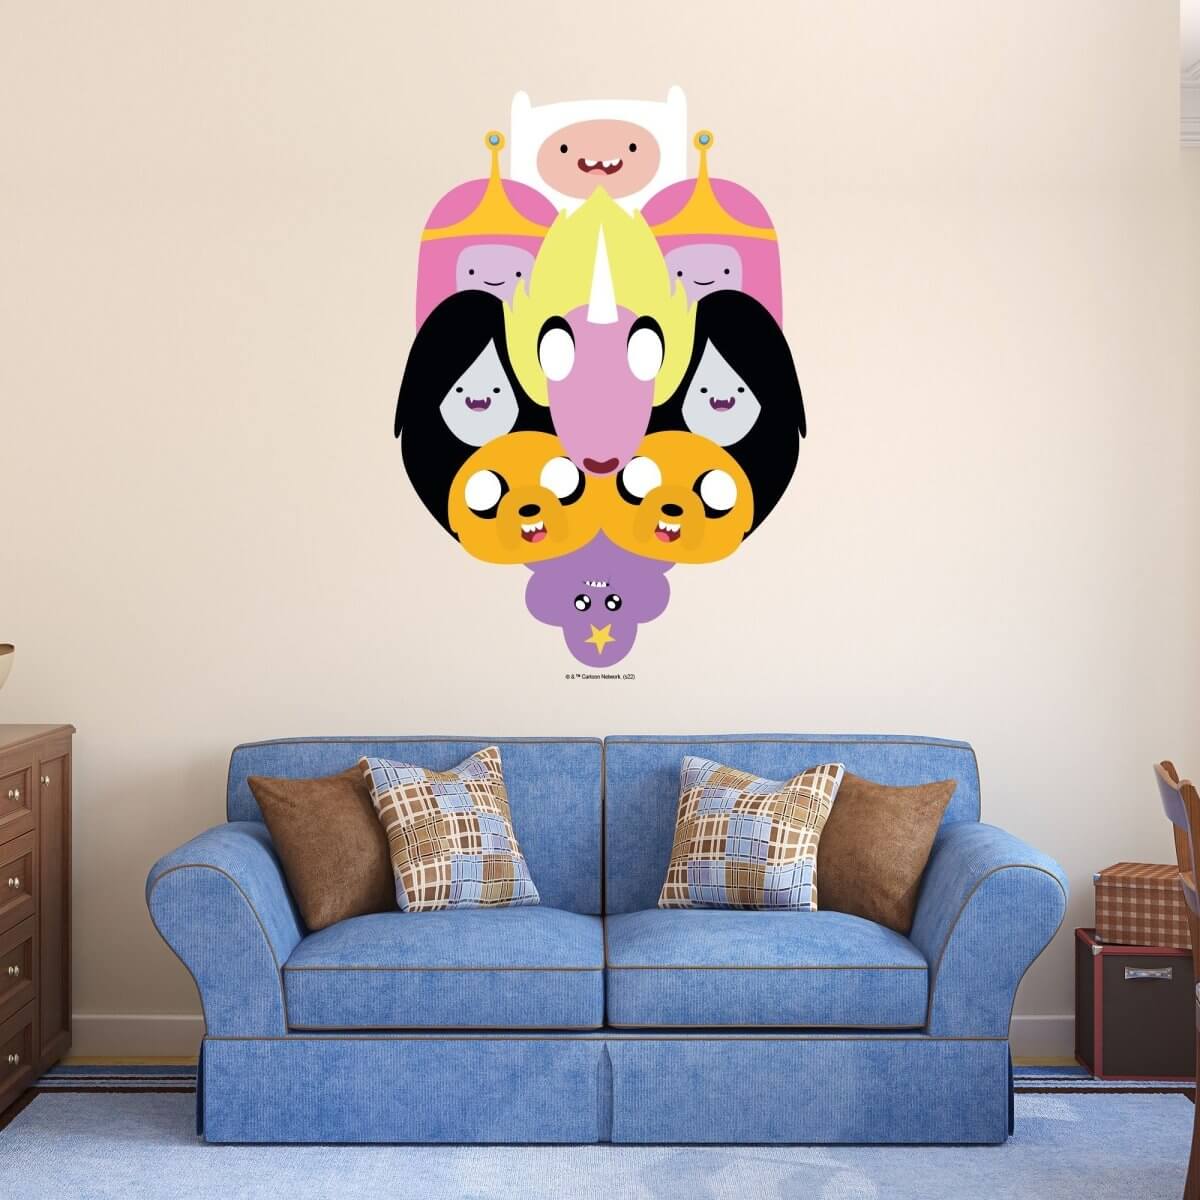 Kismet Decals Adventure Time Group 1 Licensed Wall Sticker - Easy DIY Home & Kids Room Decor Wall Decal Art - Kismet Decals